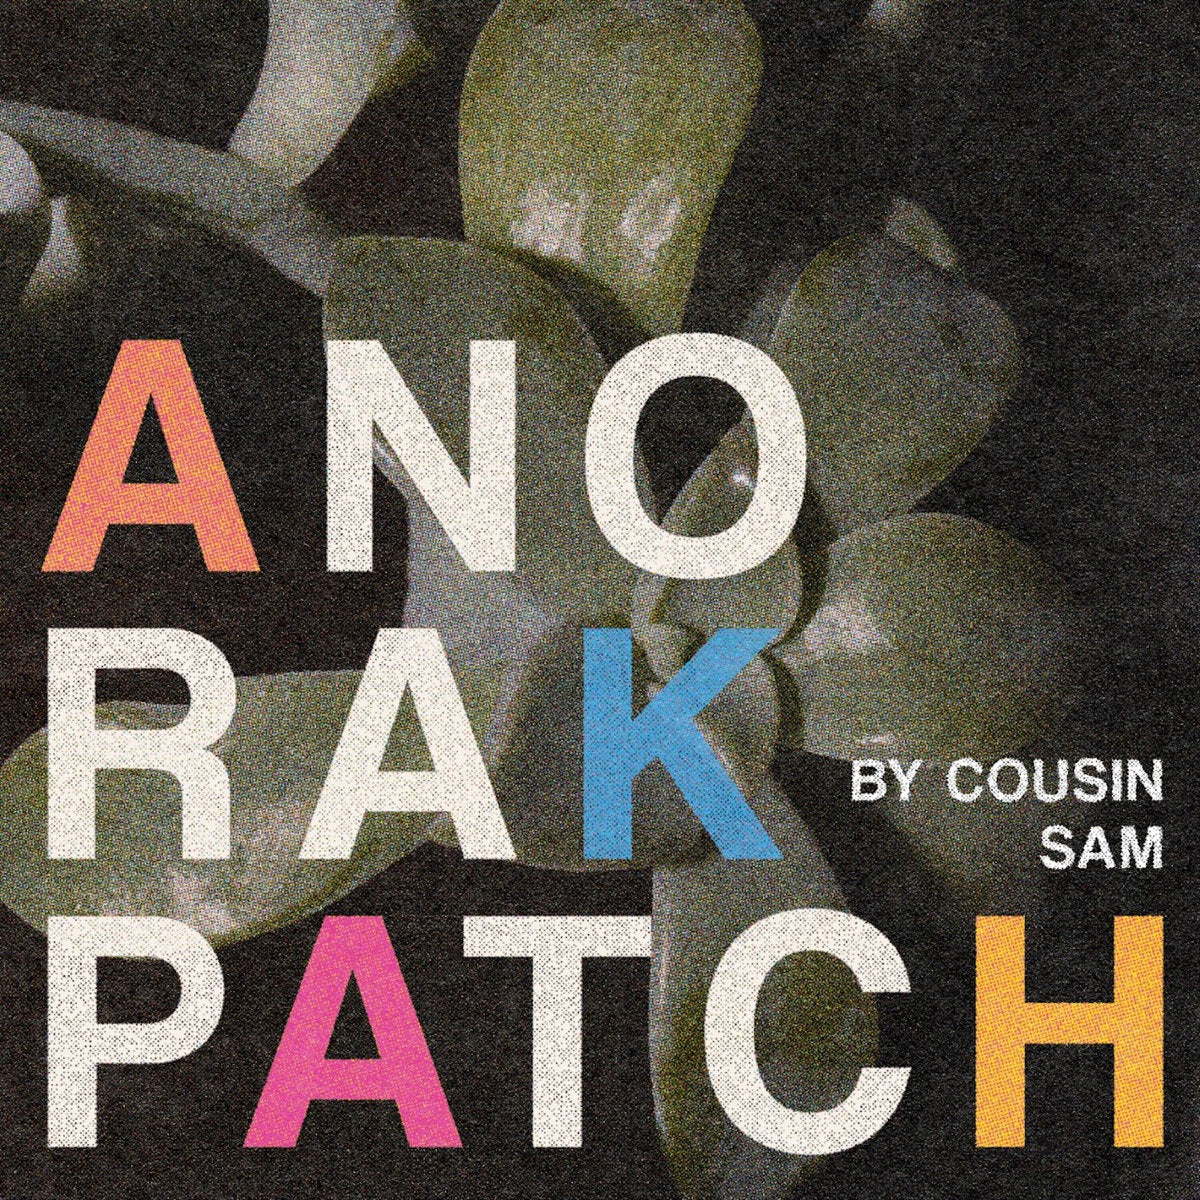 ANORAK PATCH - By Cousin Sam 'EP' - 12" - Vinyl